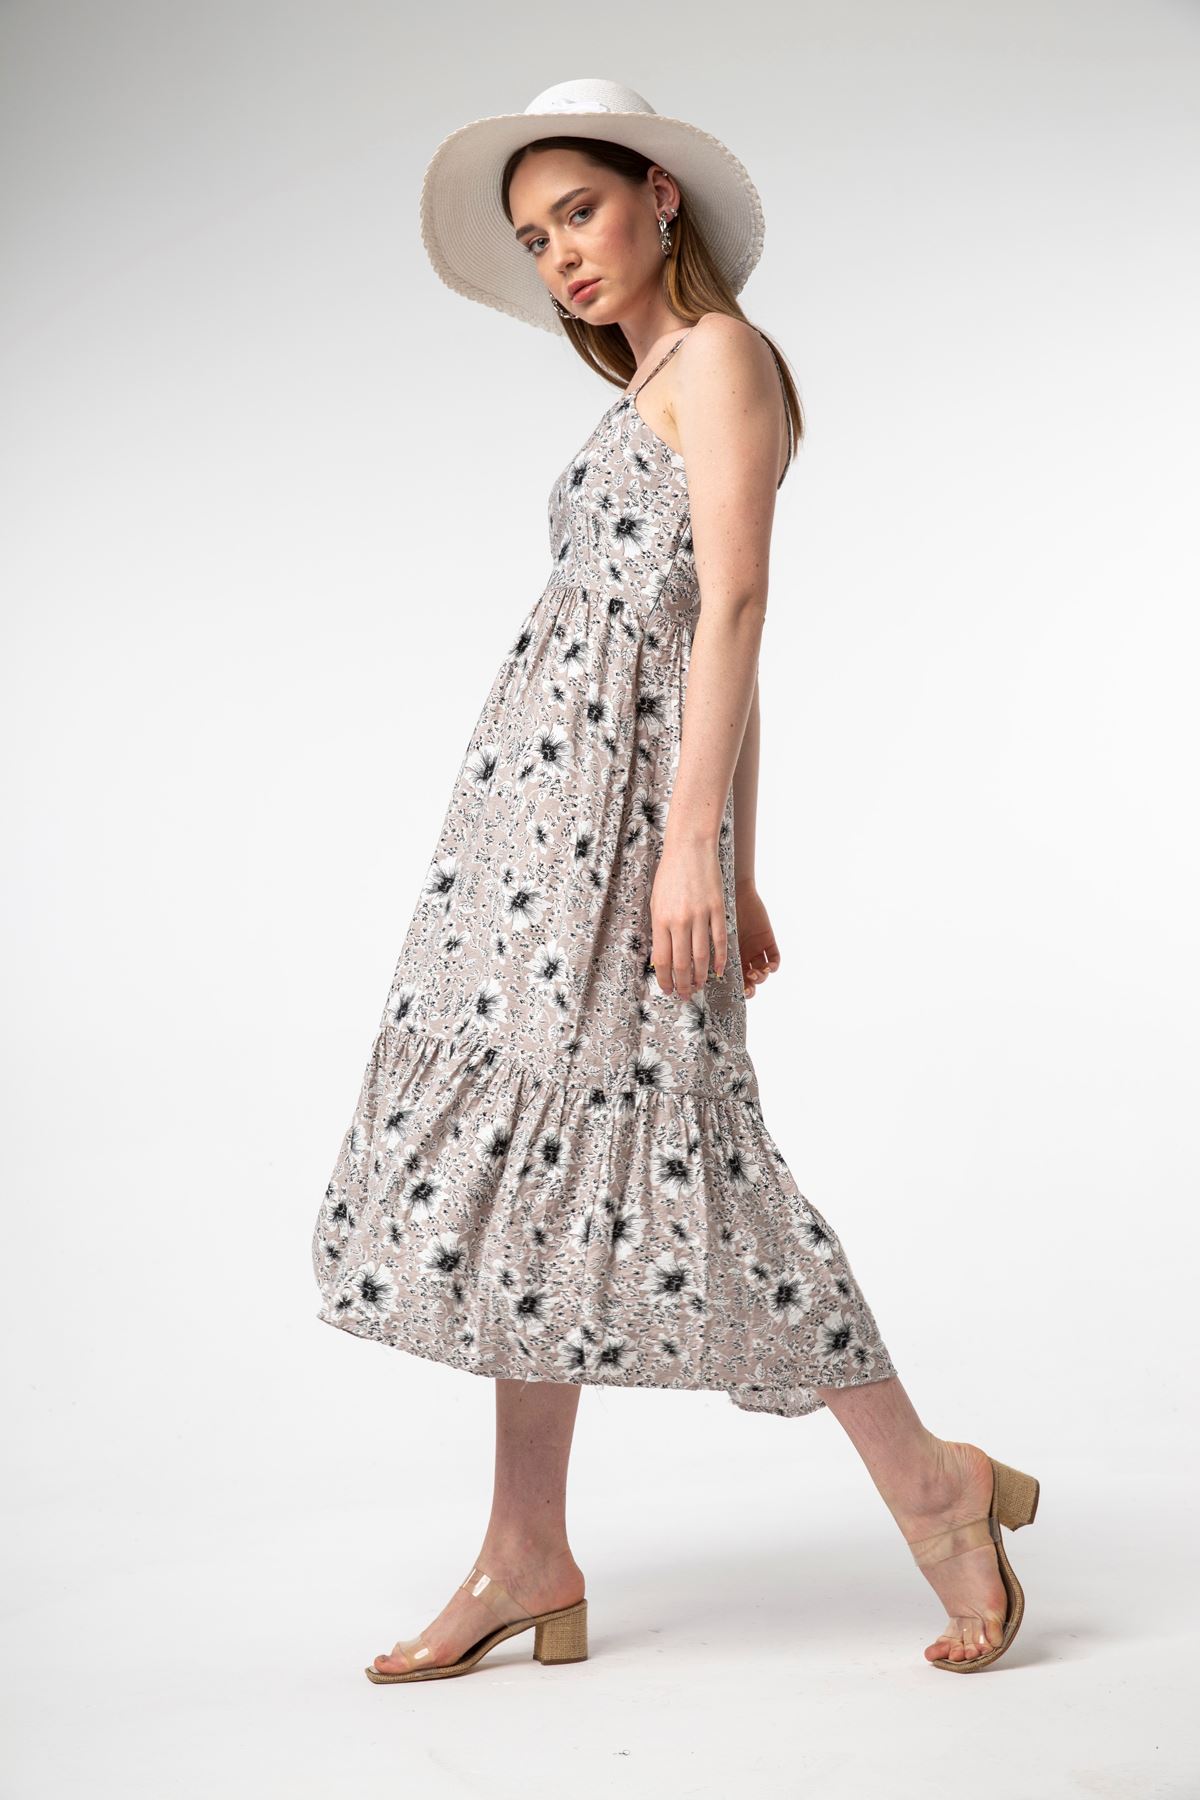 Brocade Fabric Straped Floral Print Hanging Rope Women Dress - Chanterelle 